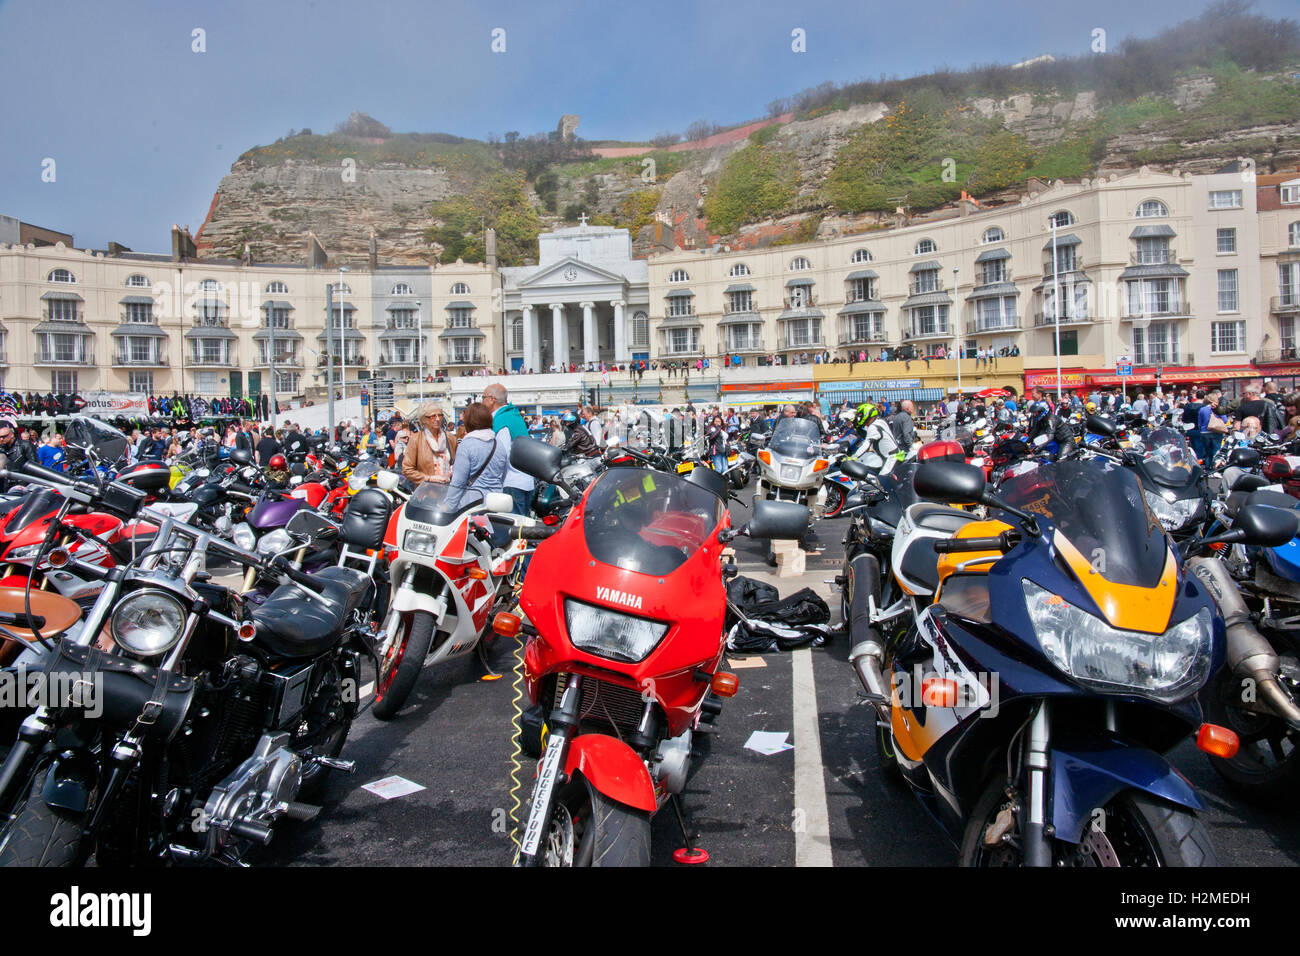 Motorbikes in Hastings on May Day Stock Photo